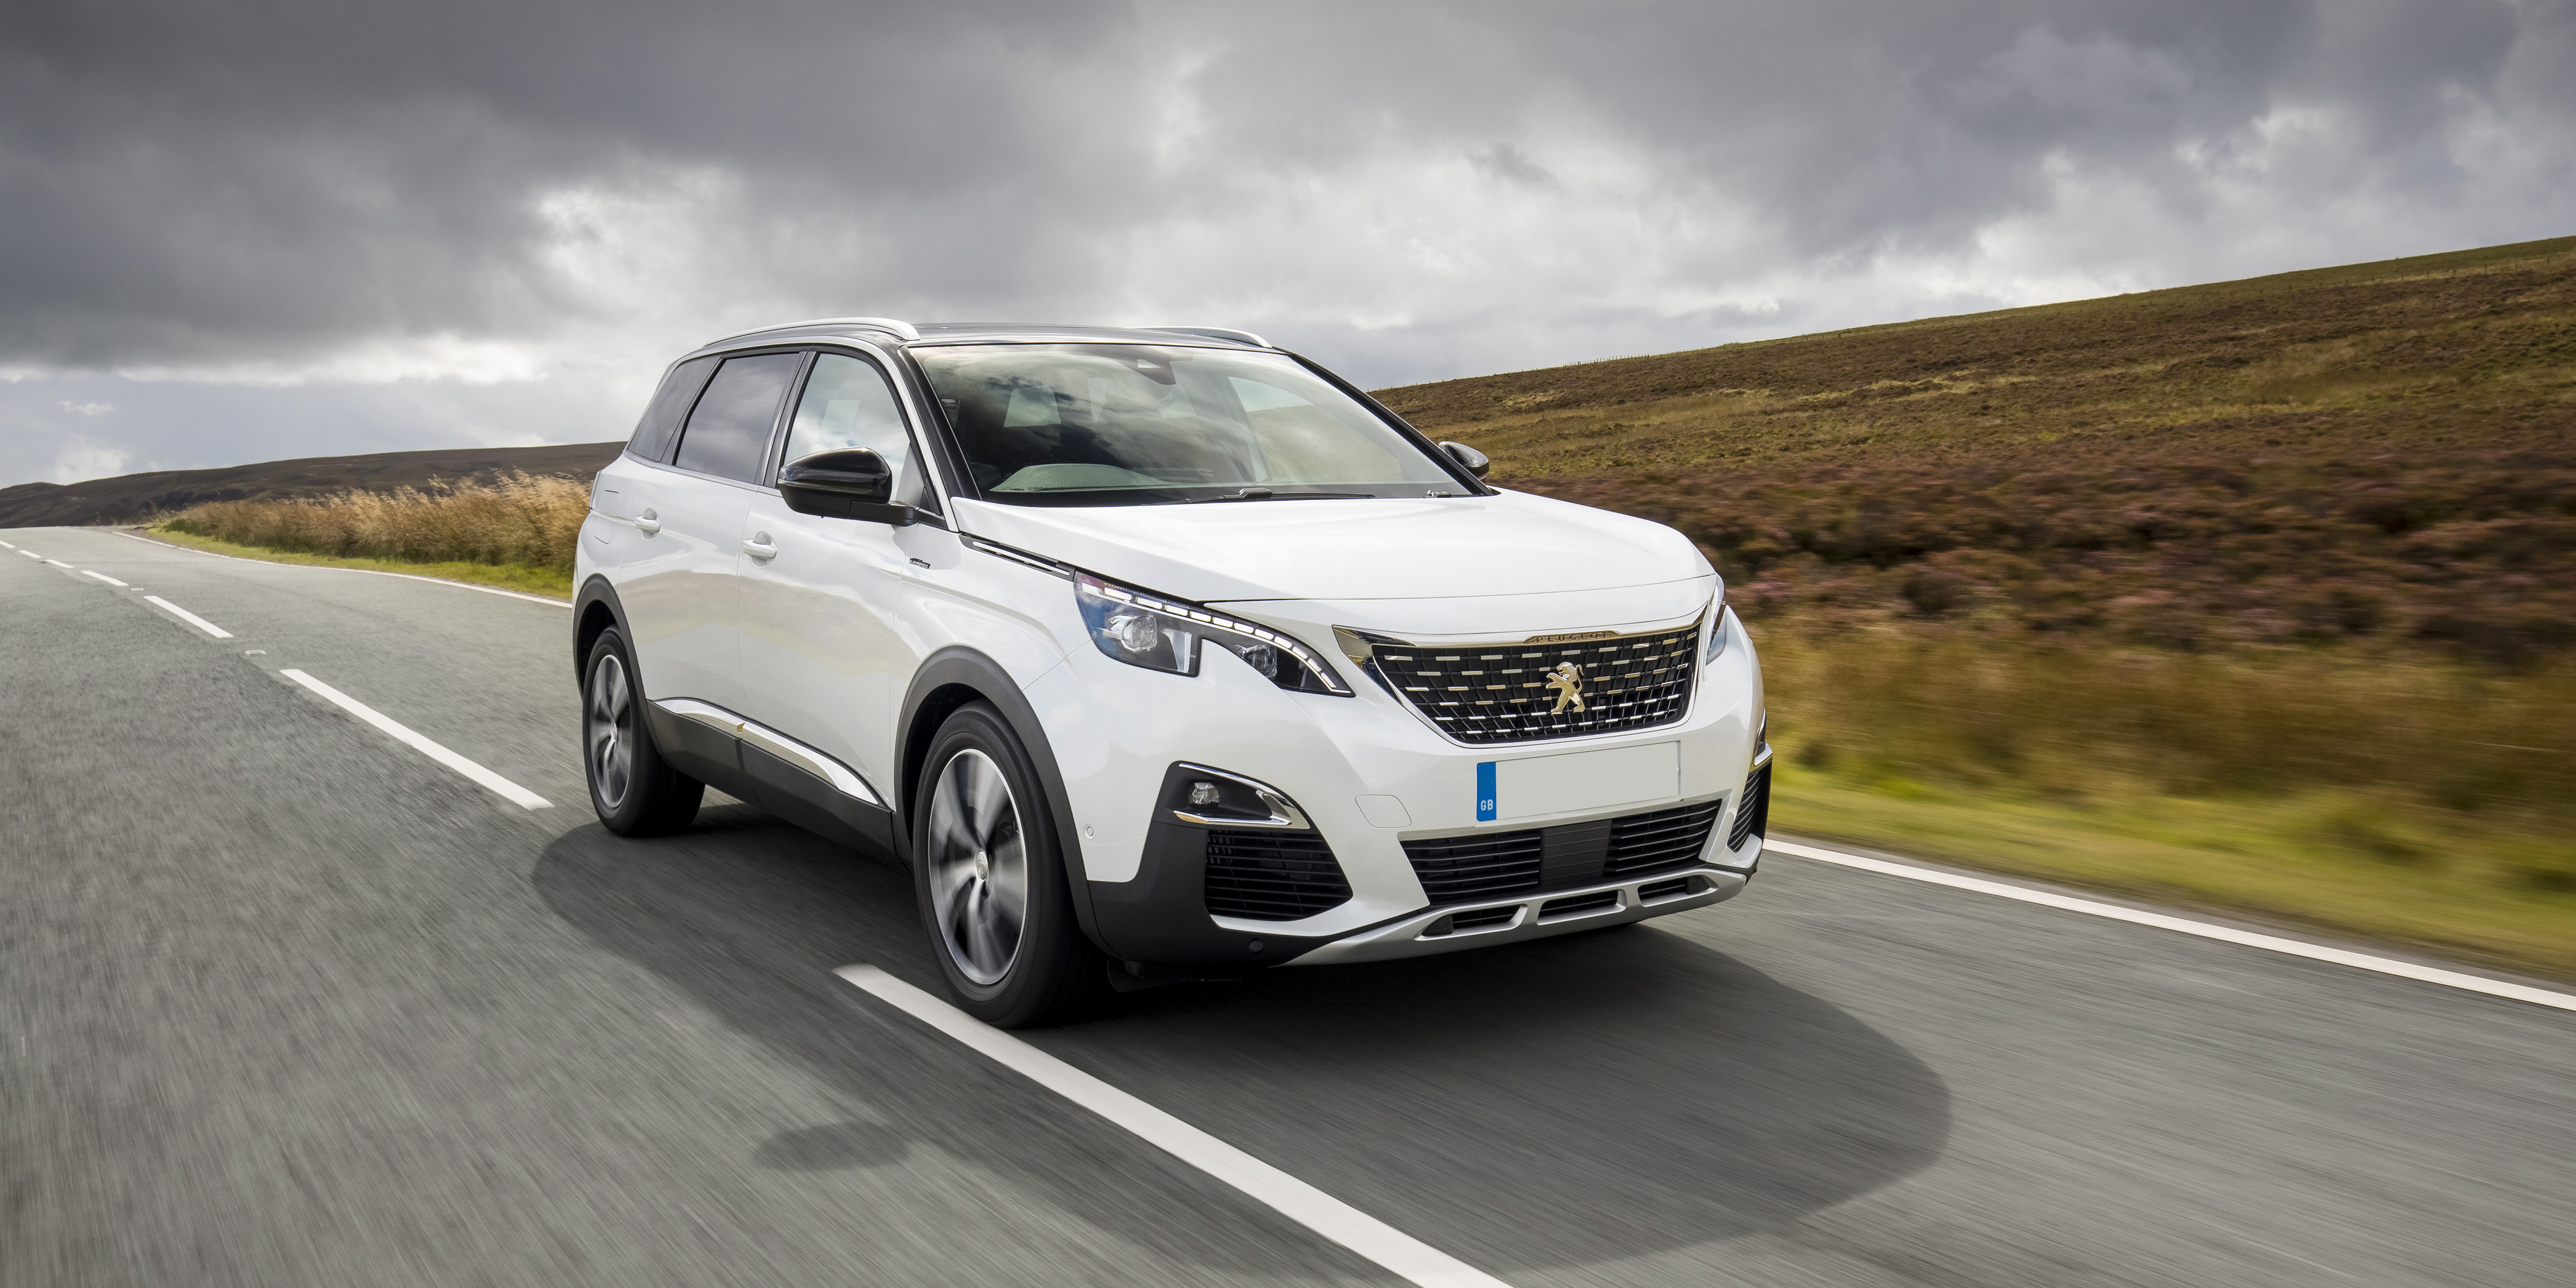 New Peugeot 5008 (2016-2020) Review, Drive, Specs & Pricing